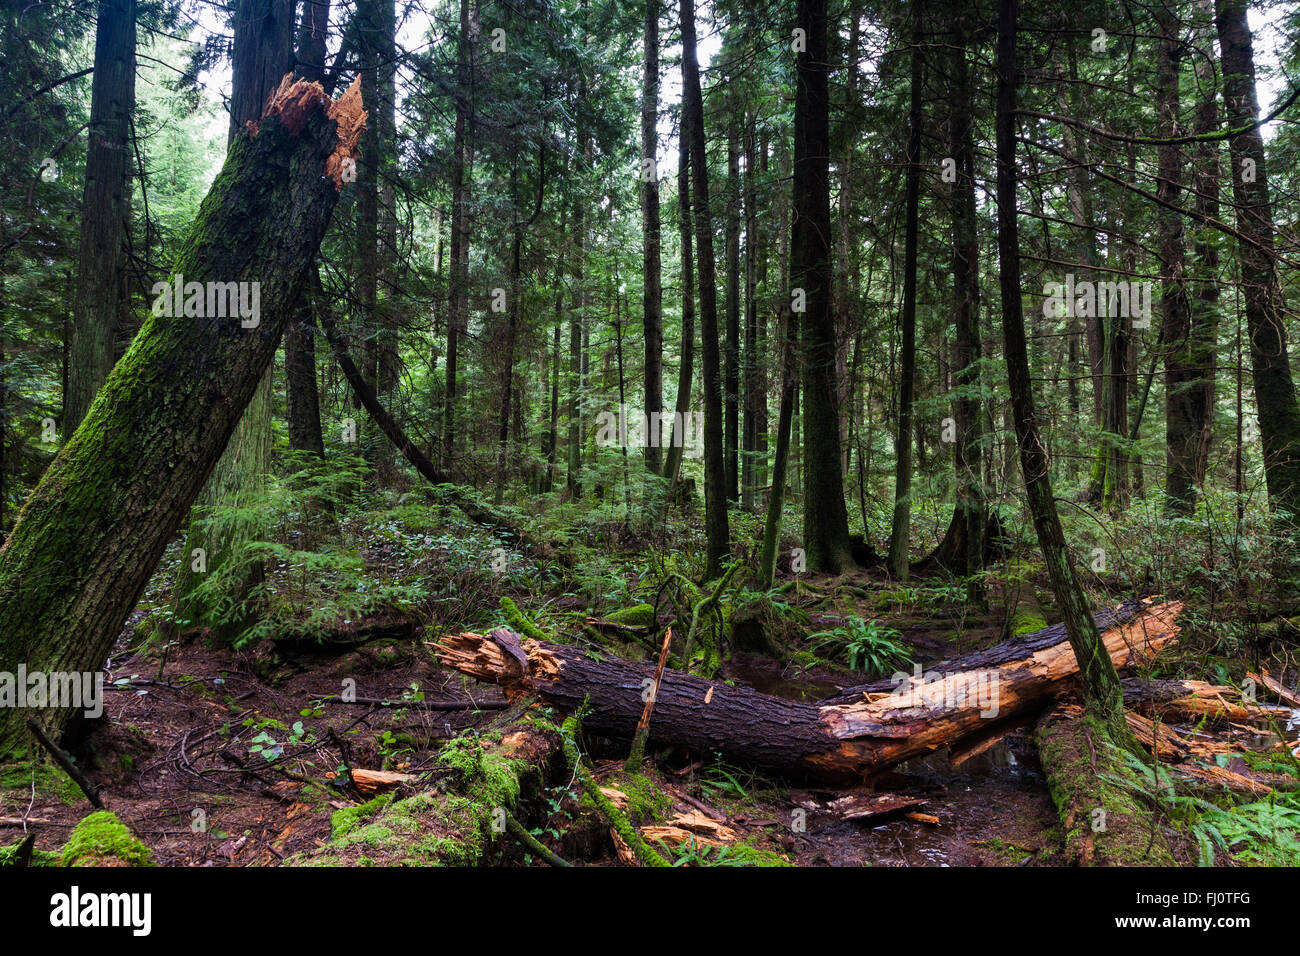 Rotten tree broken by high winds in a temperate rain forest Stock Photo